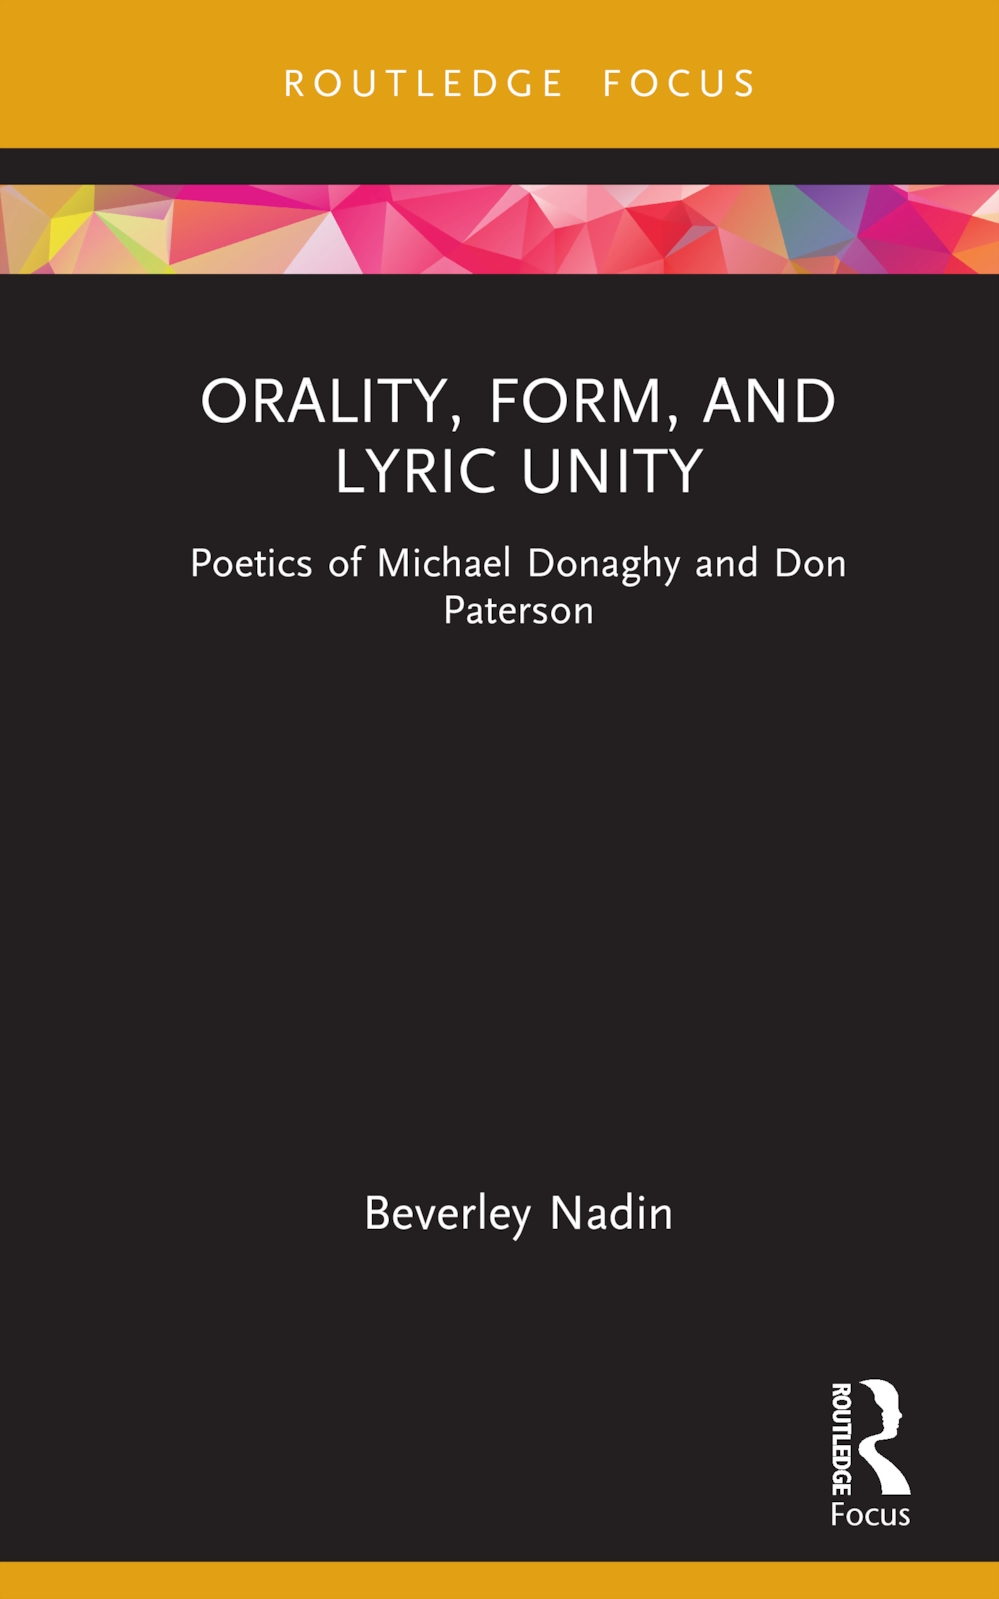 Orality, Form, and Lyric Unity: Poetics of Michael Donaghy and Don Paterson